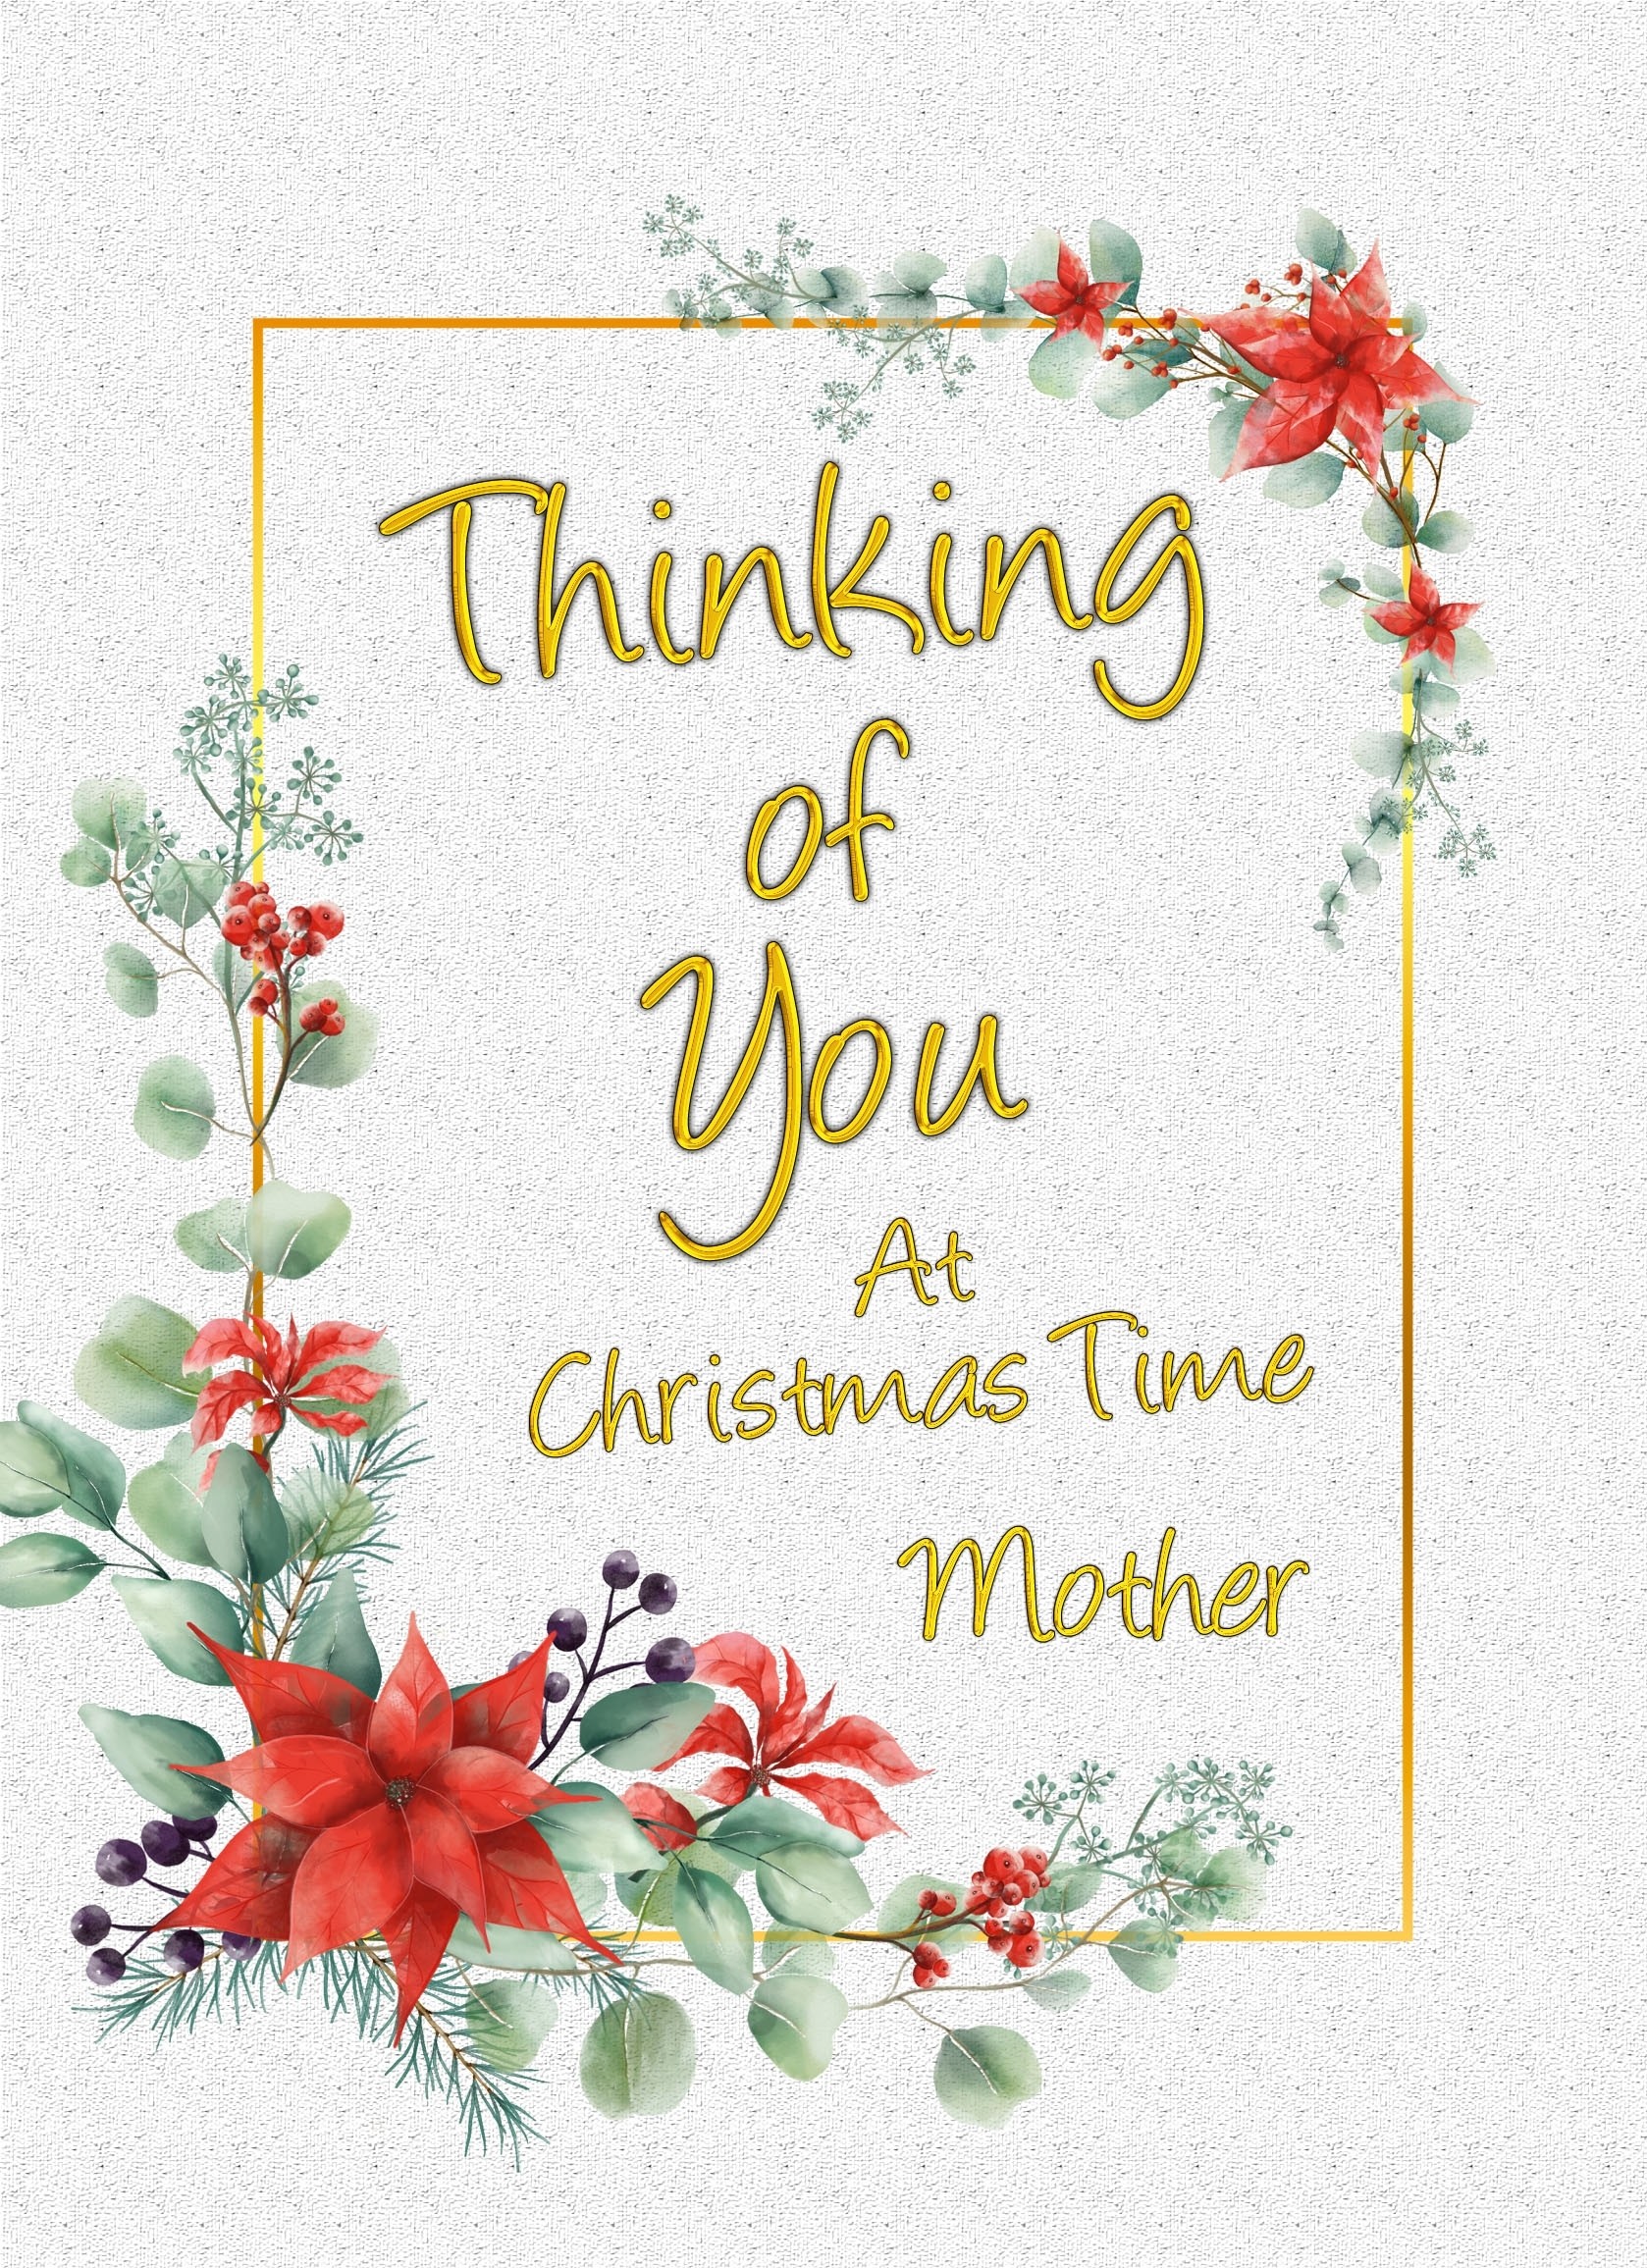 Thinking of You at Christmas Card For Mother